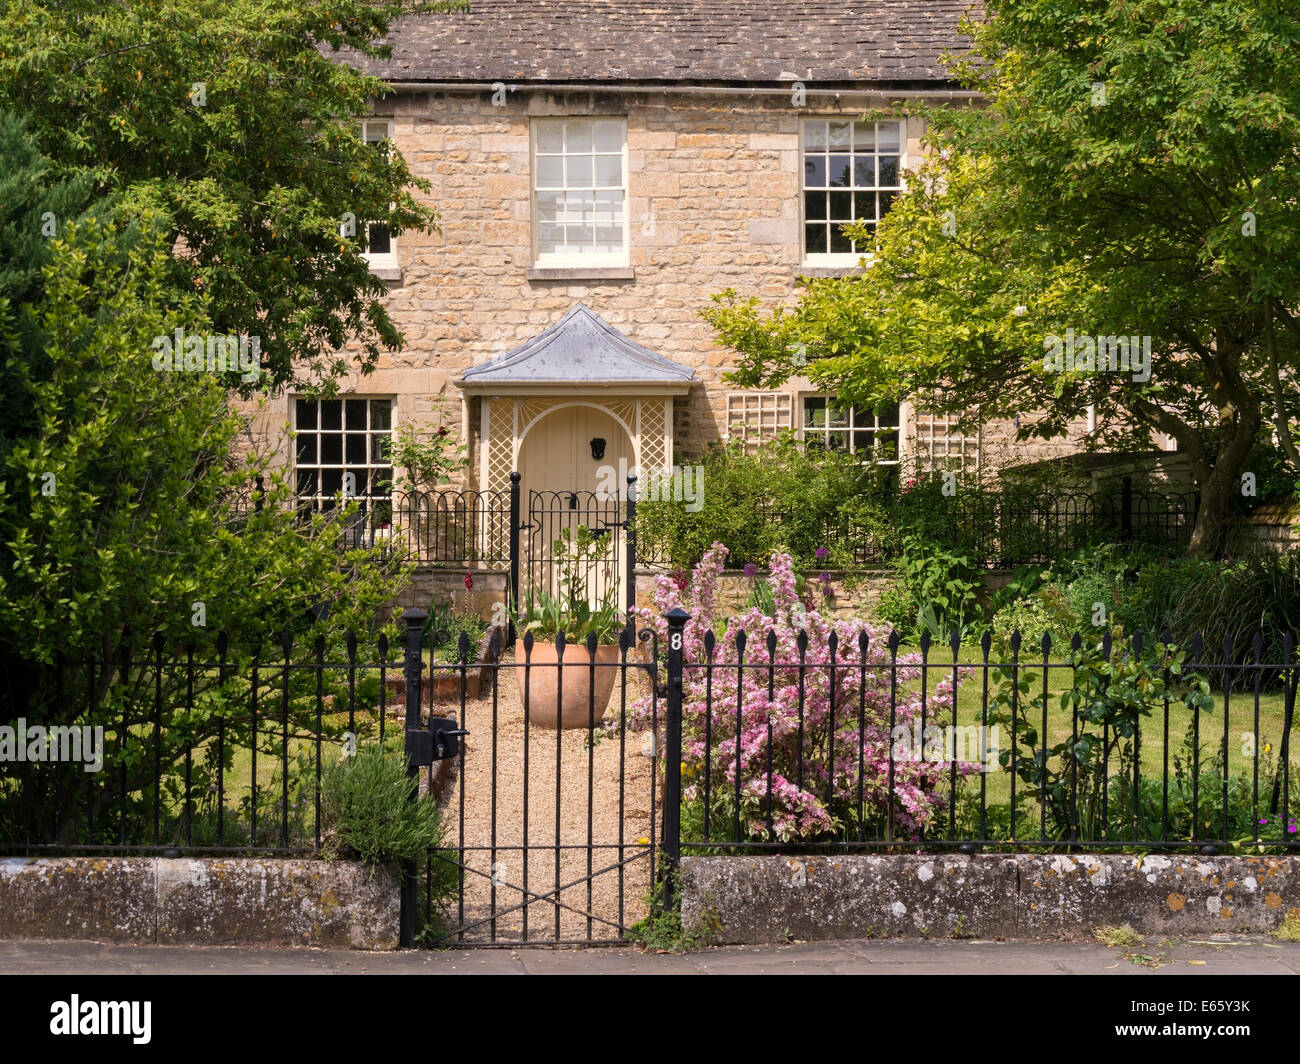 Old attractive stone town house cottage with pretty porch, garden & metal railings, Bath Row,Stamford, Lincolnshire,England,UK Stock Photo